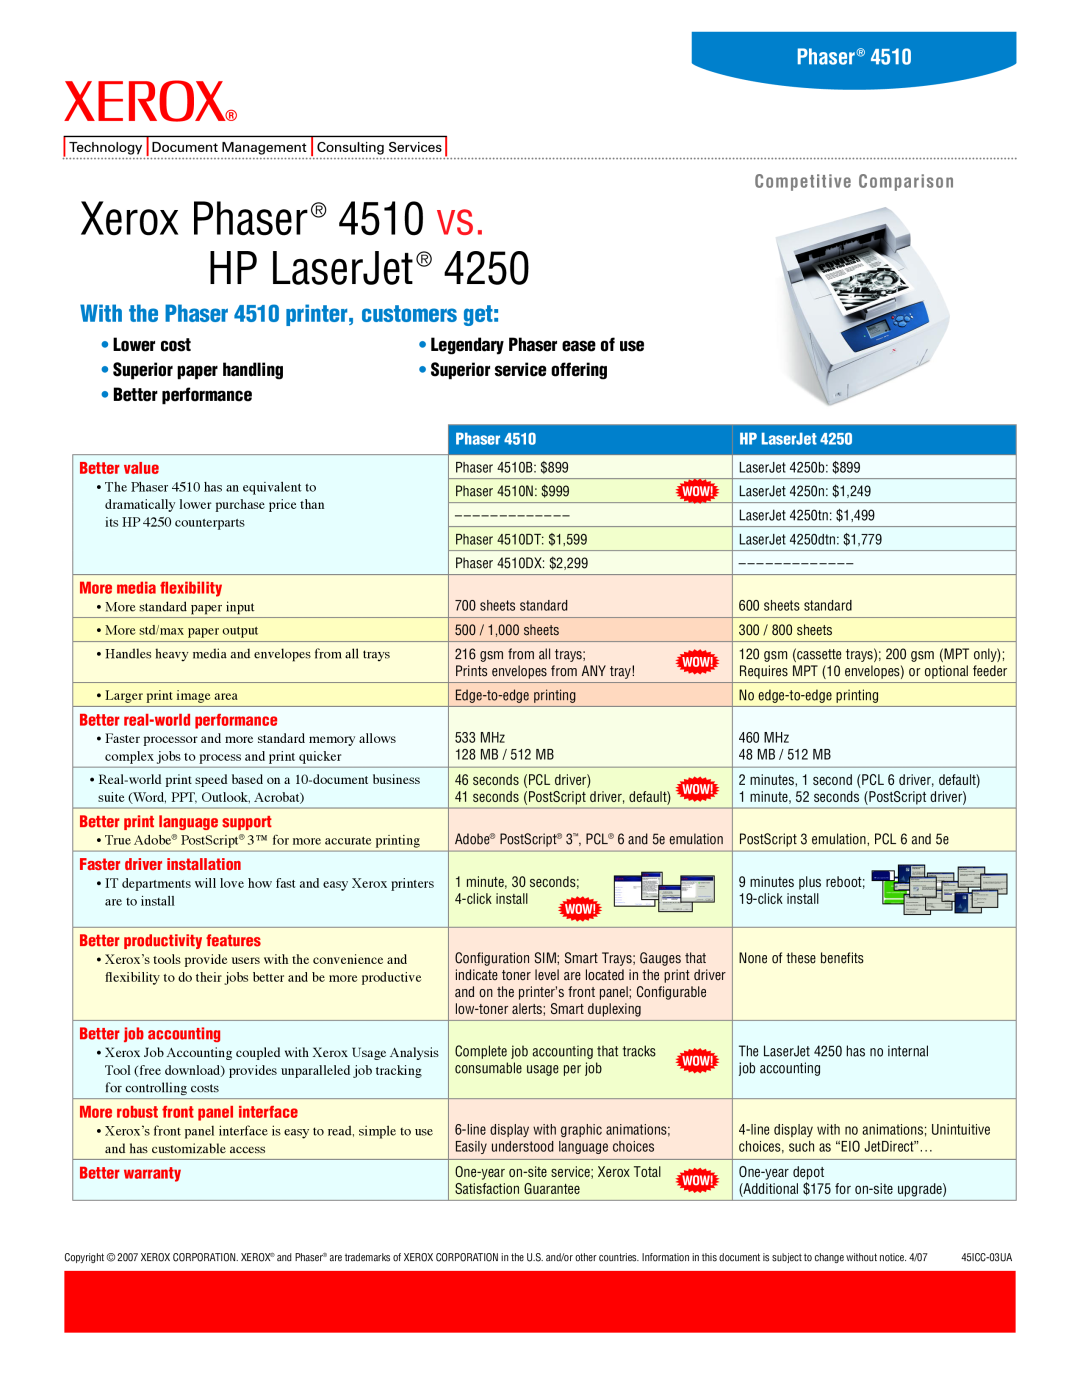 Xerox specifications WorkCentre 4250/4260, Black-and-White Multifunction Printer 